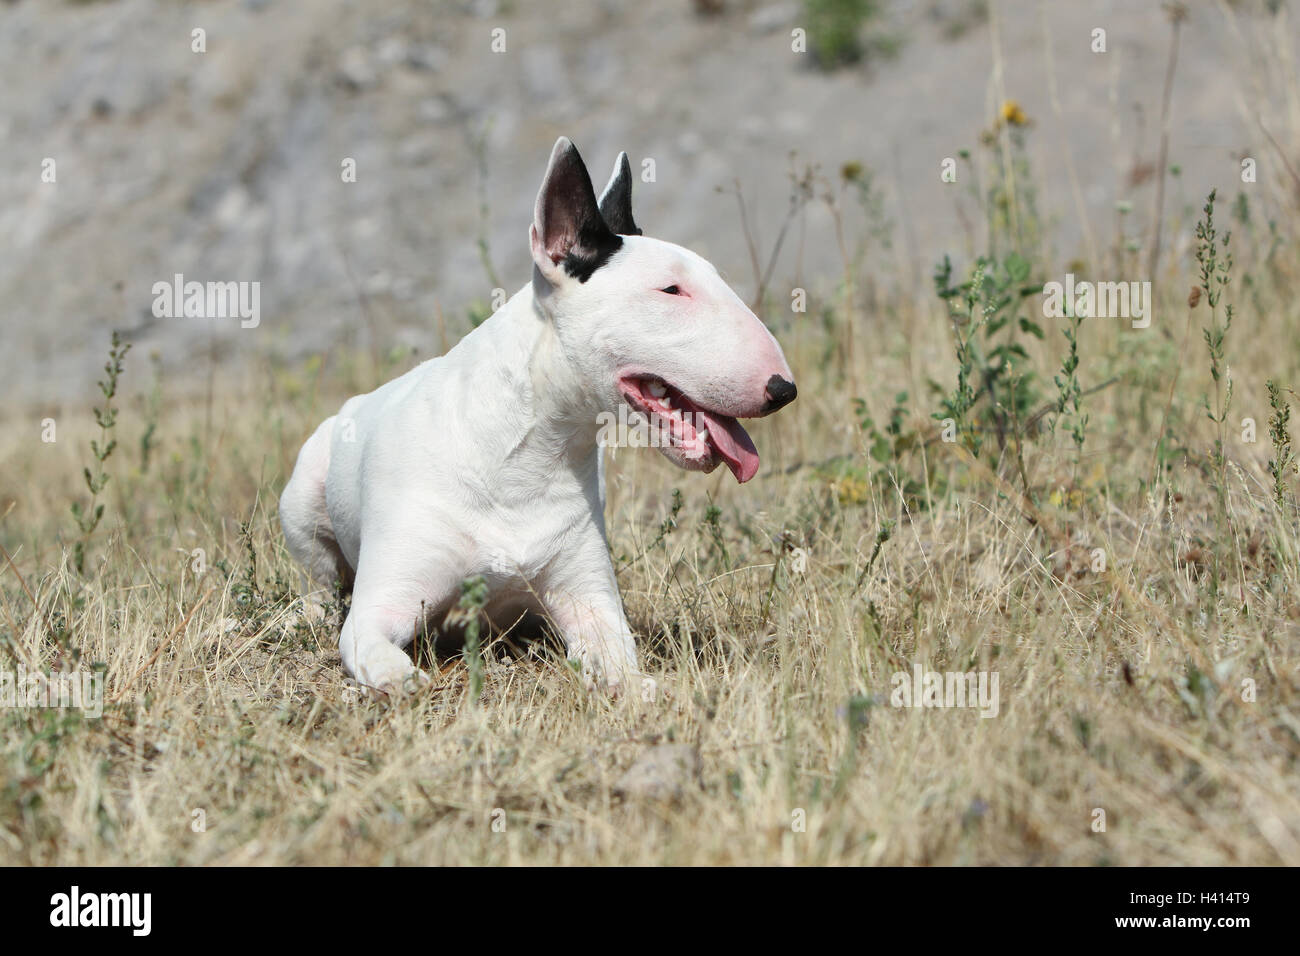 Dog Bull Terrier Anglais / bully / Gladator avec adultes Banque D'Images